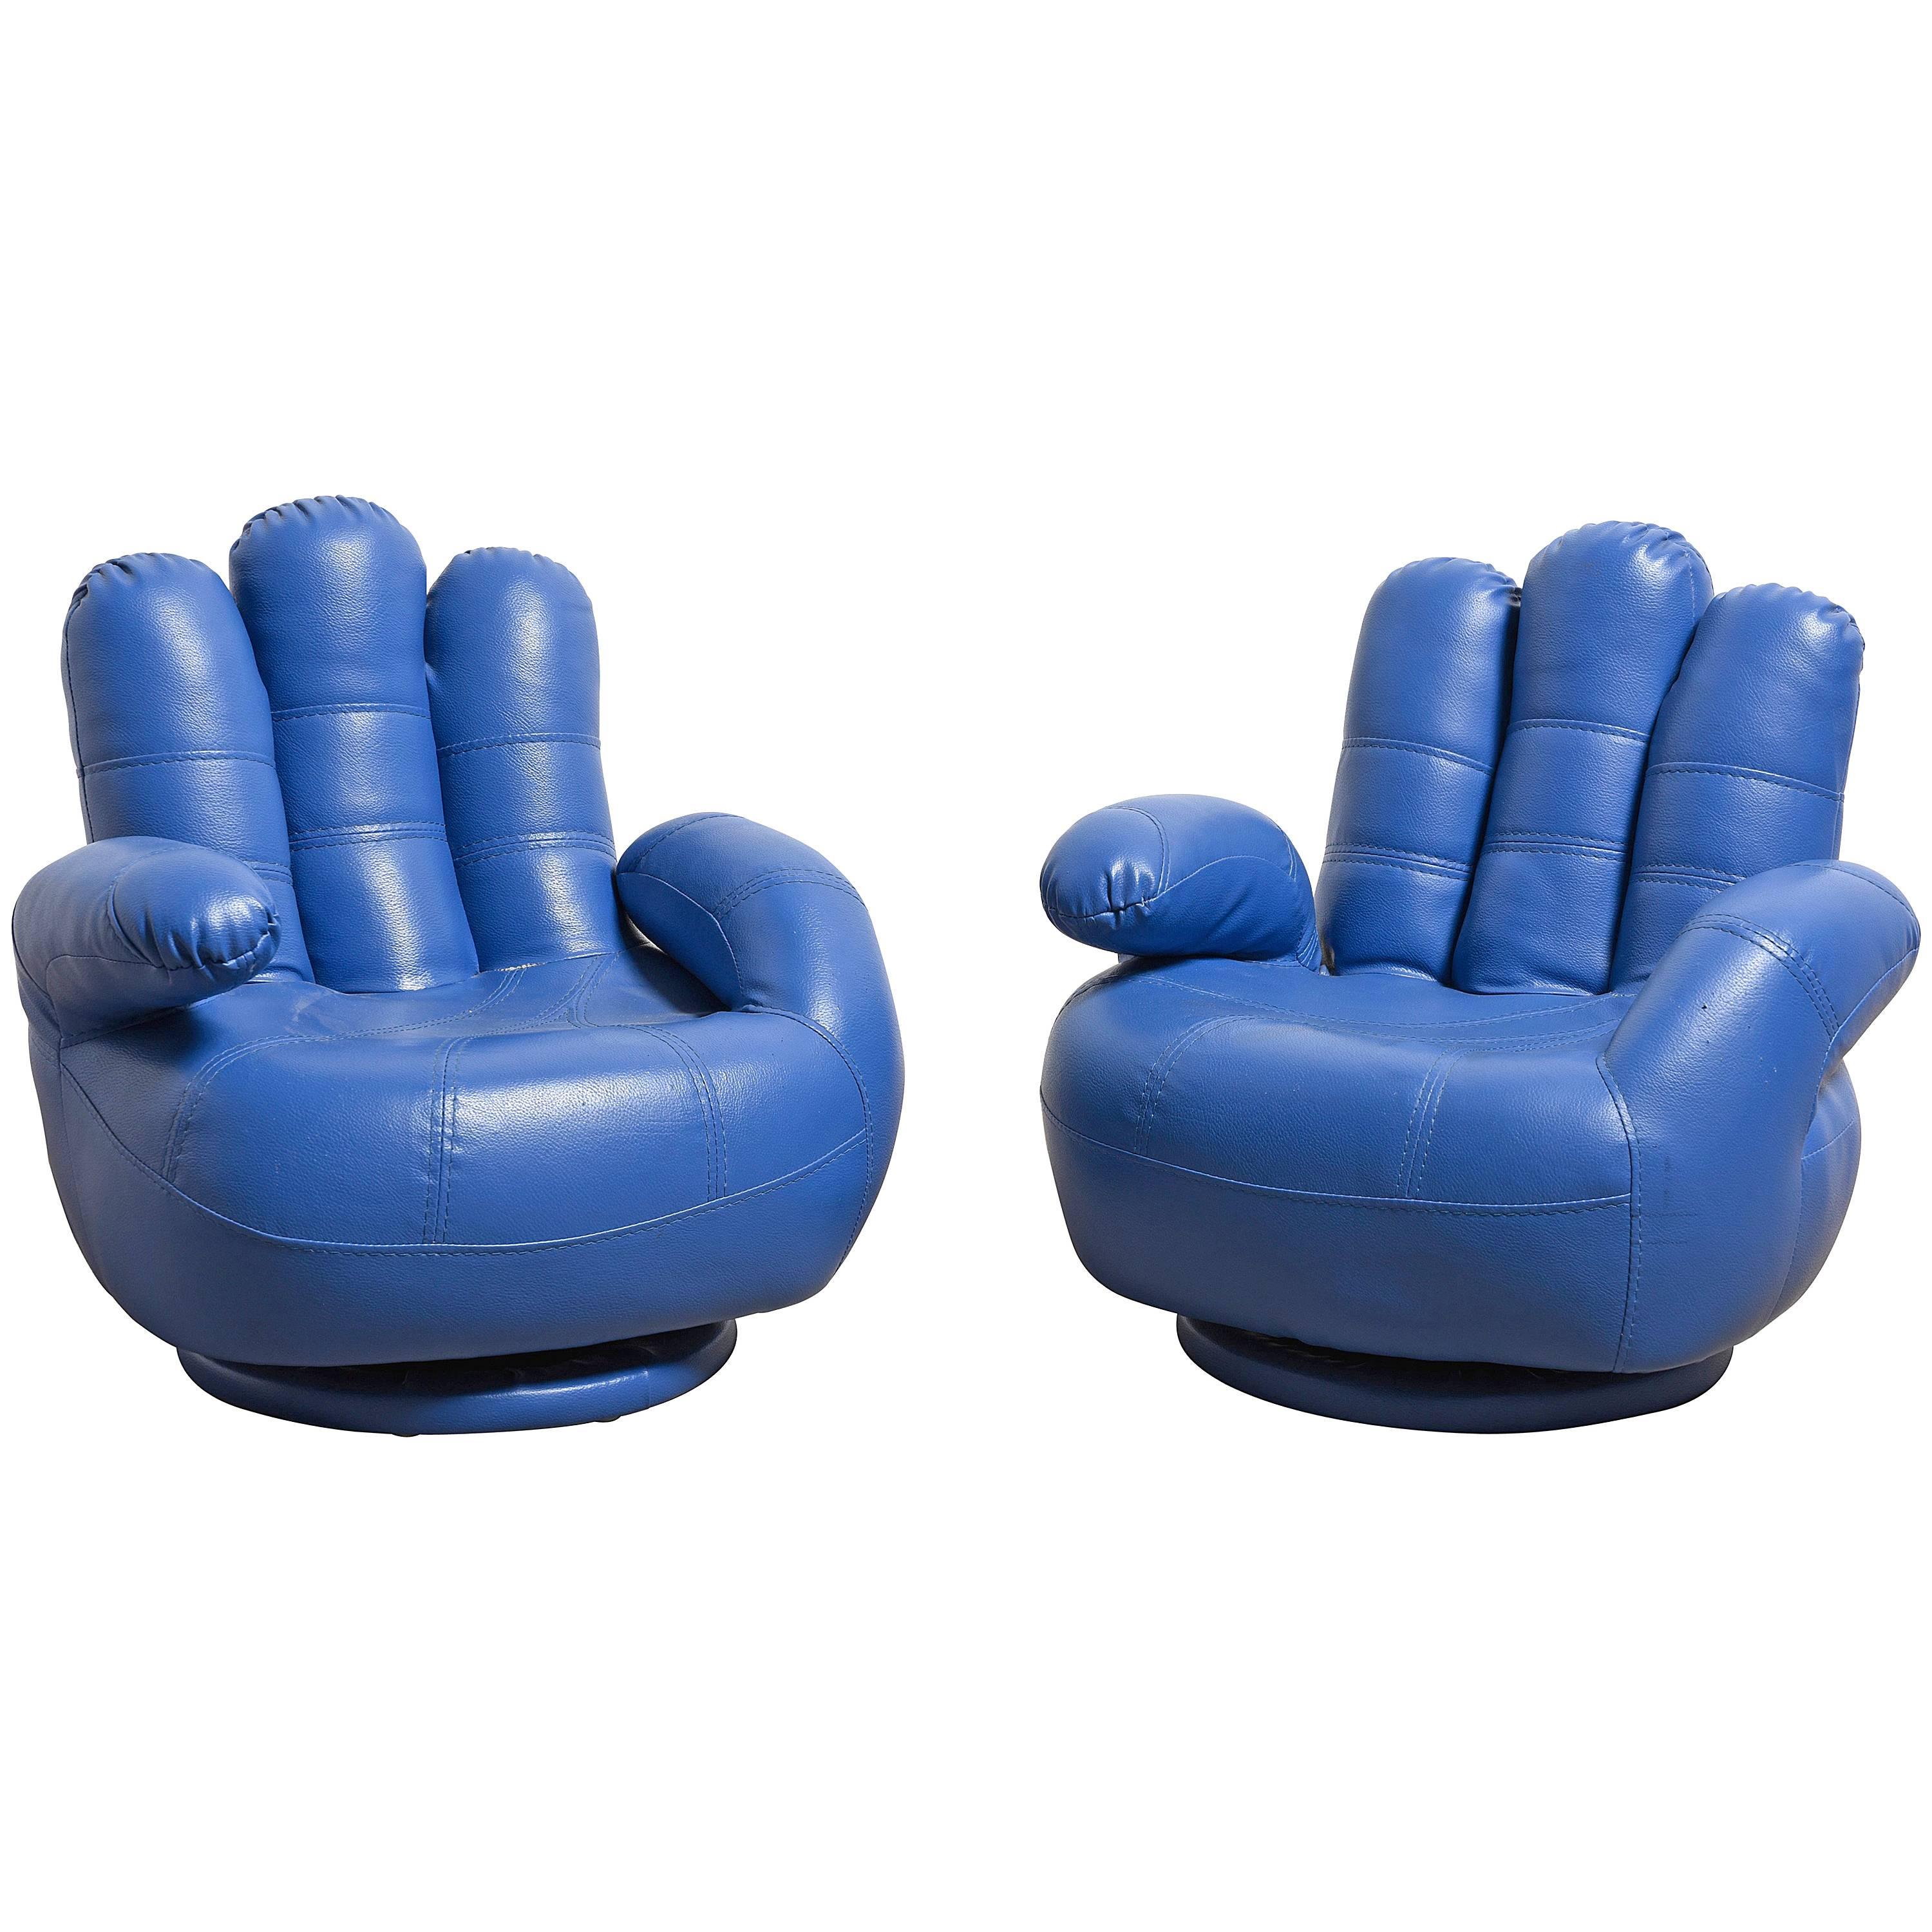 Set of Two Children Swivel Chairs in the Form of Hands Designed by Salotti